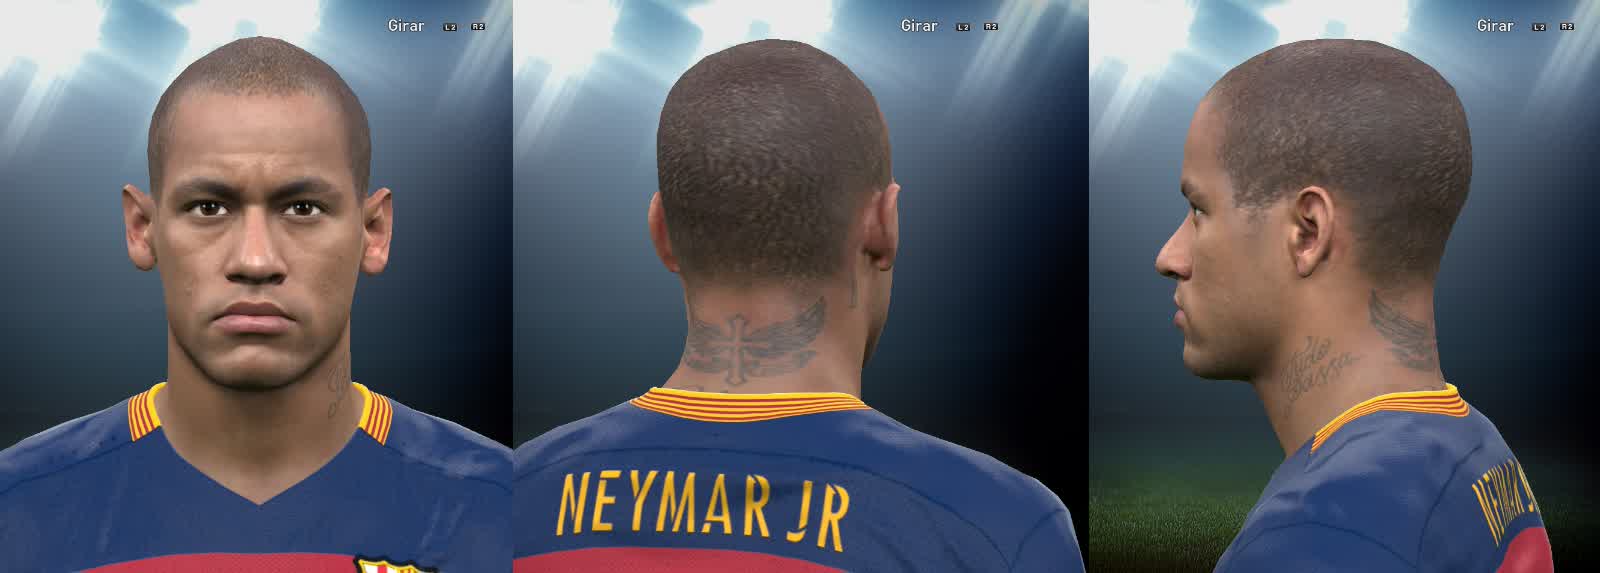 PES 2016 Neymar New Hairstyle by UDJ  PES PATCH MODIF